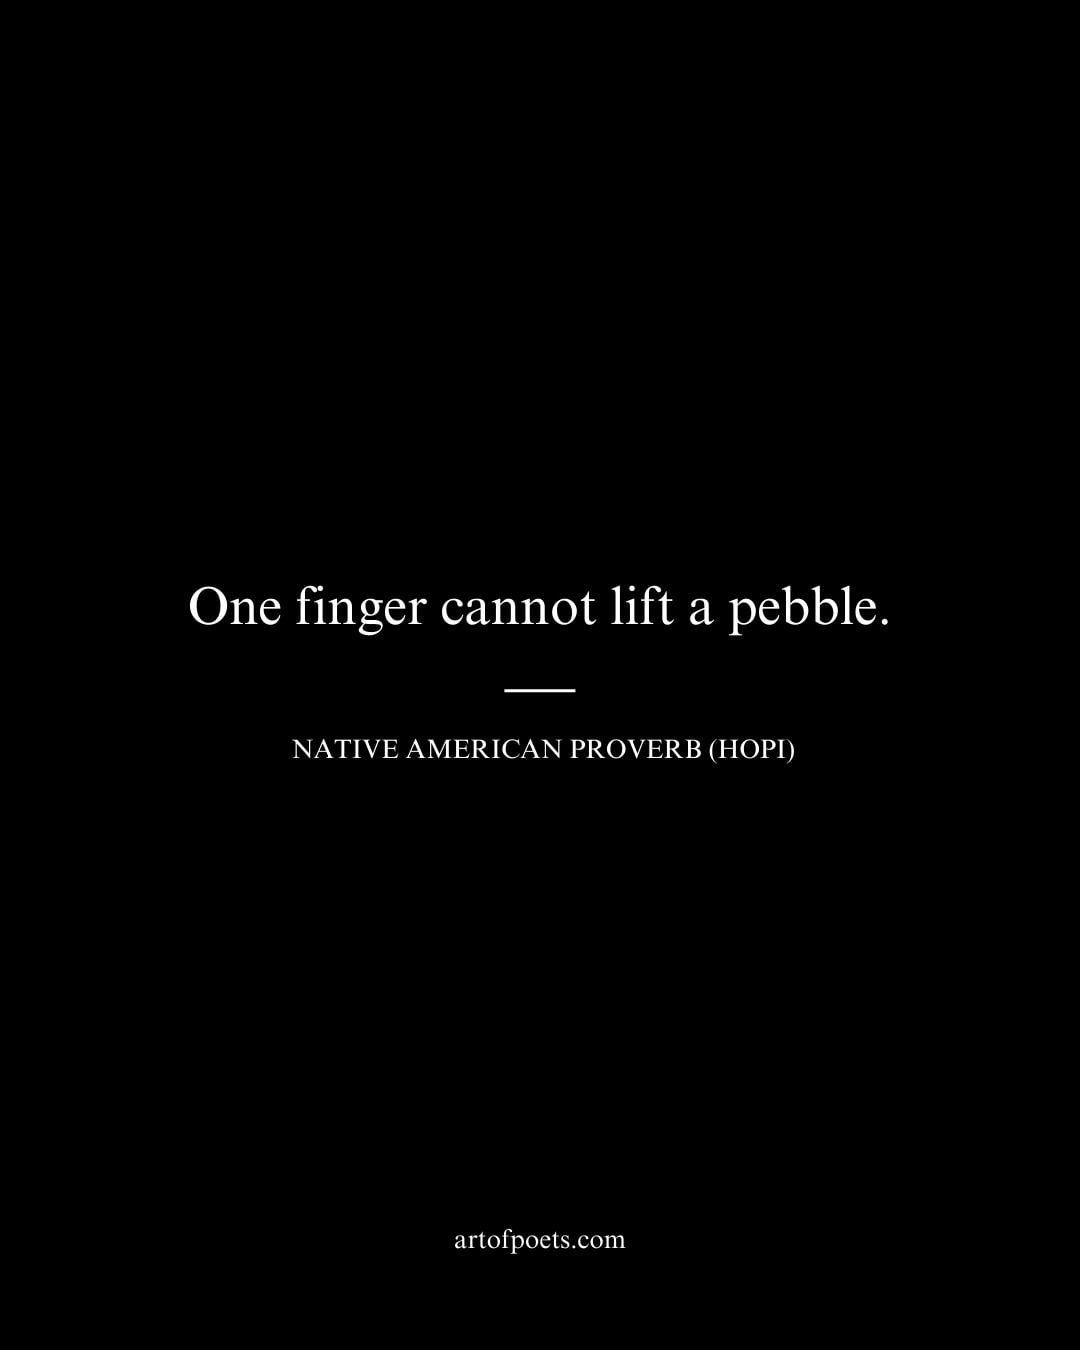 One finger cannot lift a pebble